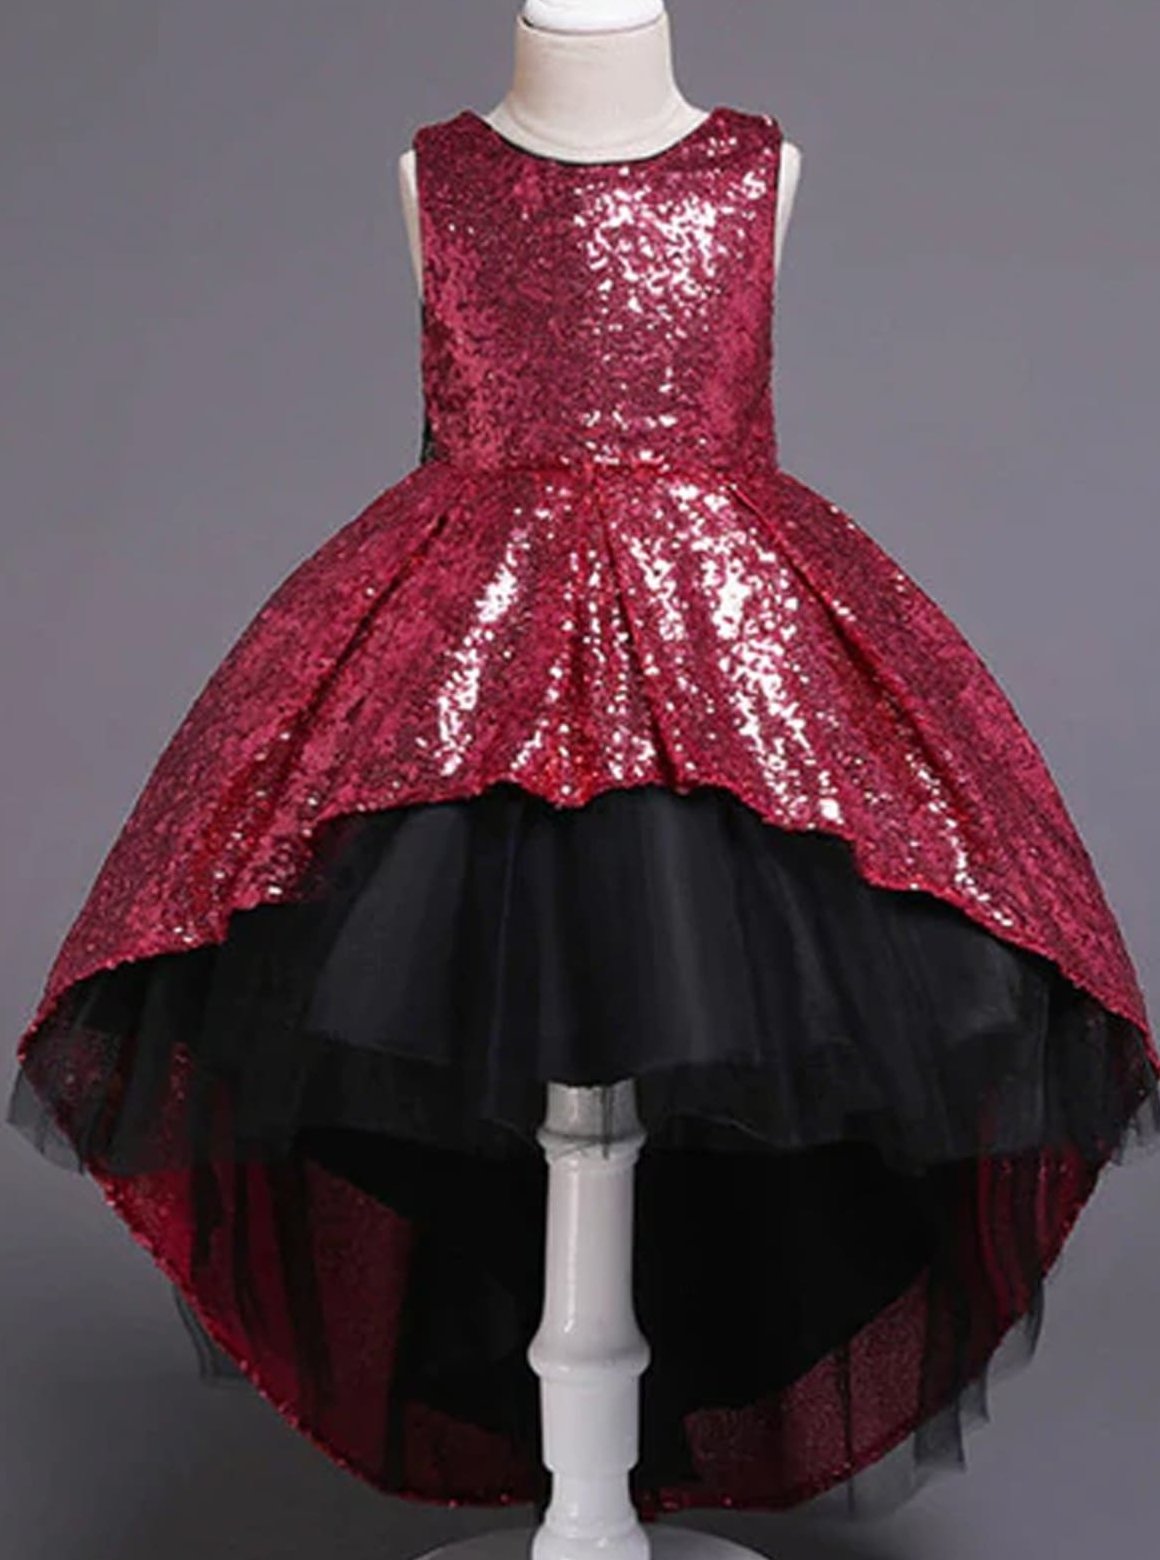 Winter Formal Dress | Girls Two Tone Sequin Hi-Lo Holiday Party Dress